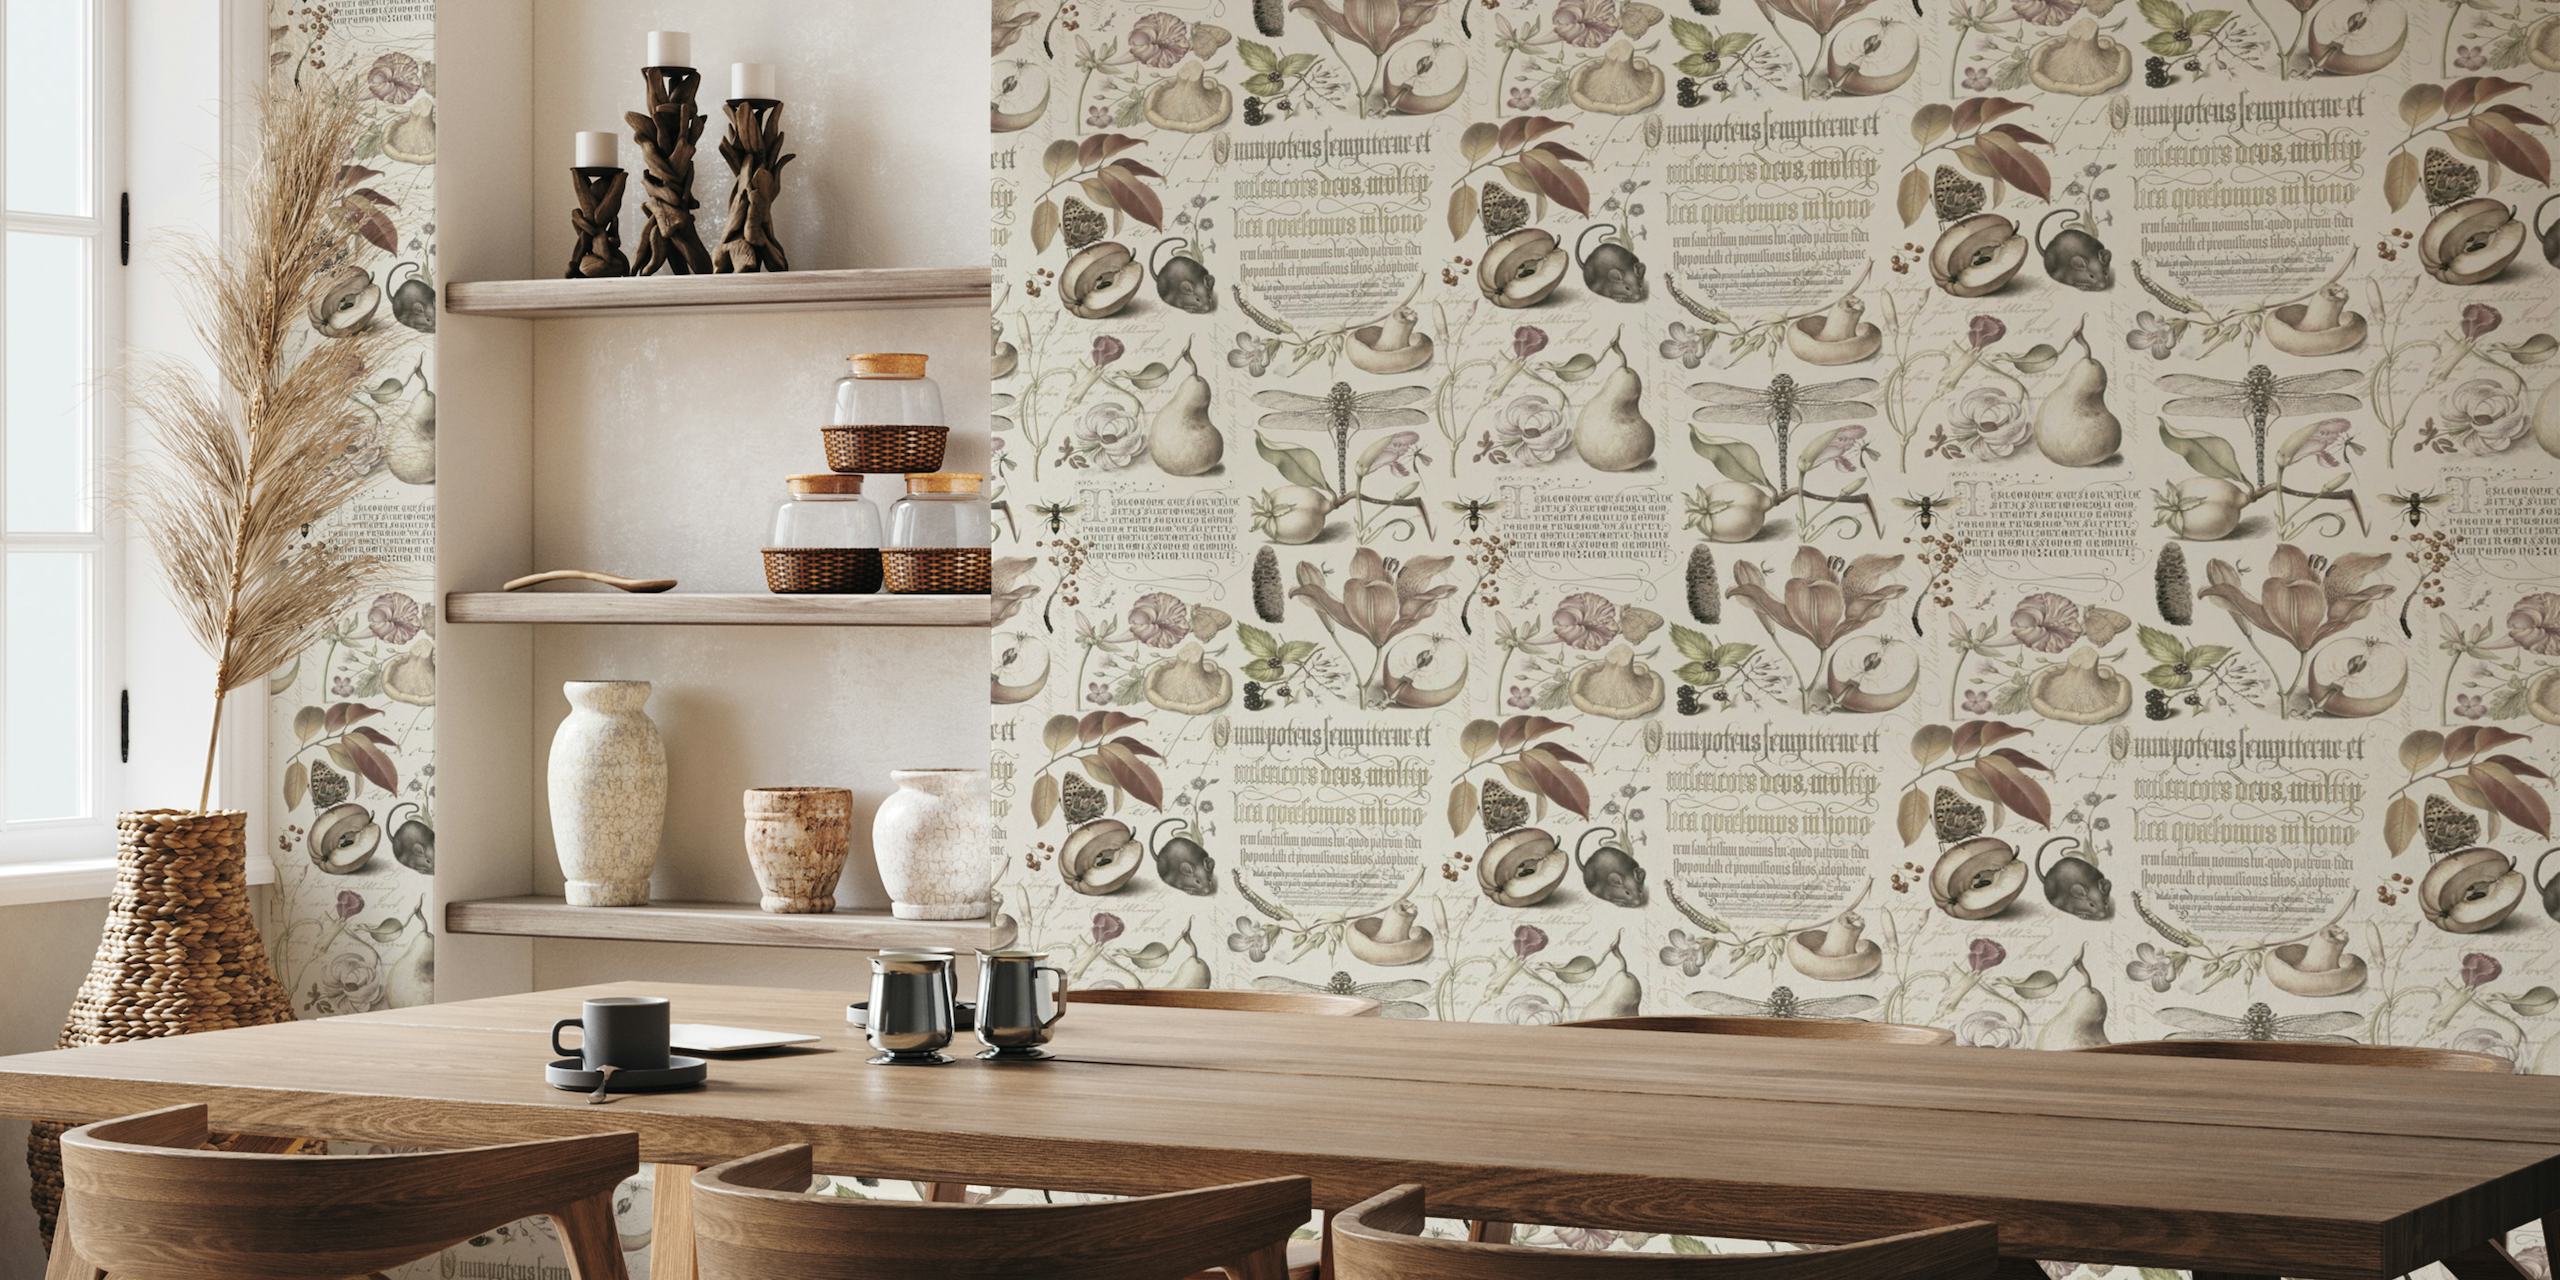 Botanical Treasures By Joris Hoefnagel With Plants, Fruits And Calligraphy Neutral Beige behang